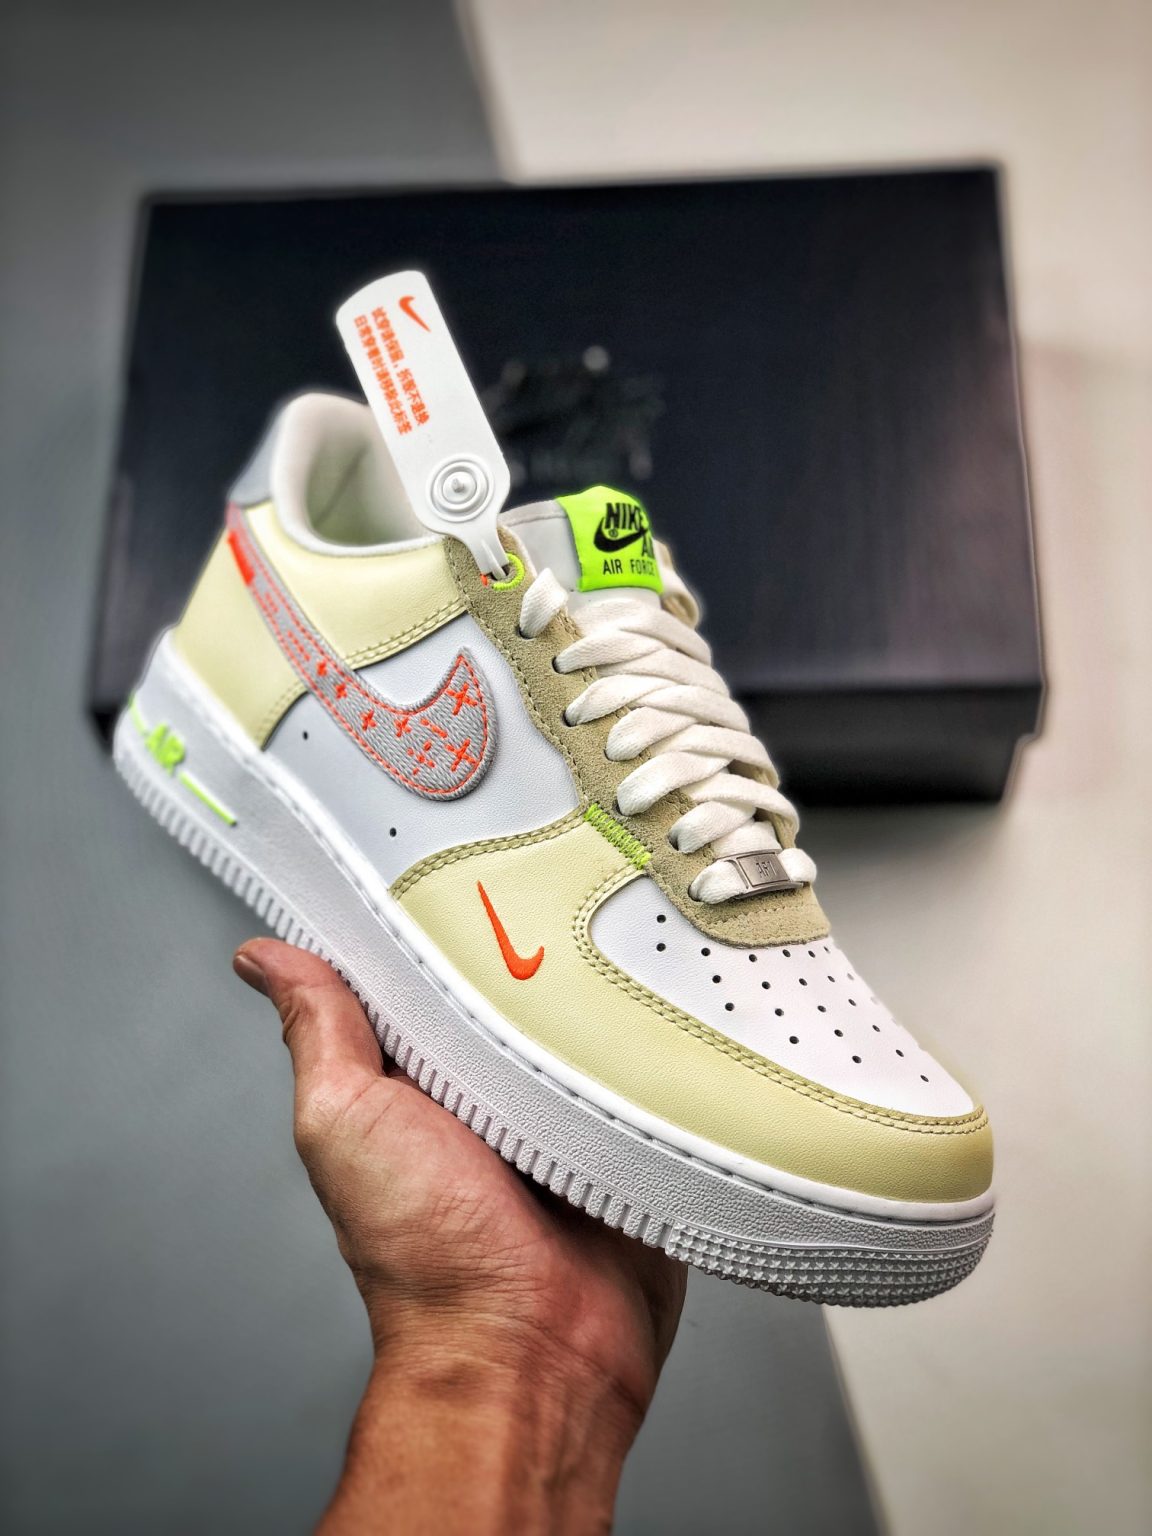 Nike Air Force 1 Low “Just Stitch It” White Tan Neon FB1852-111 For ...